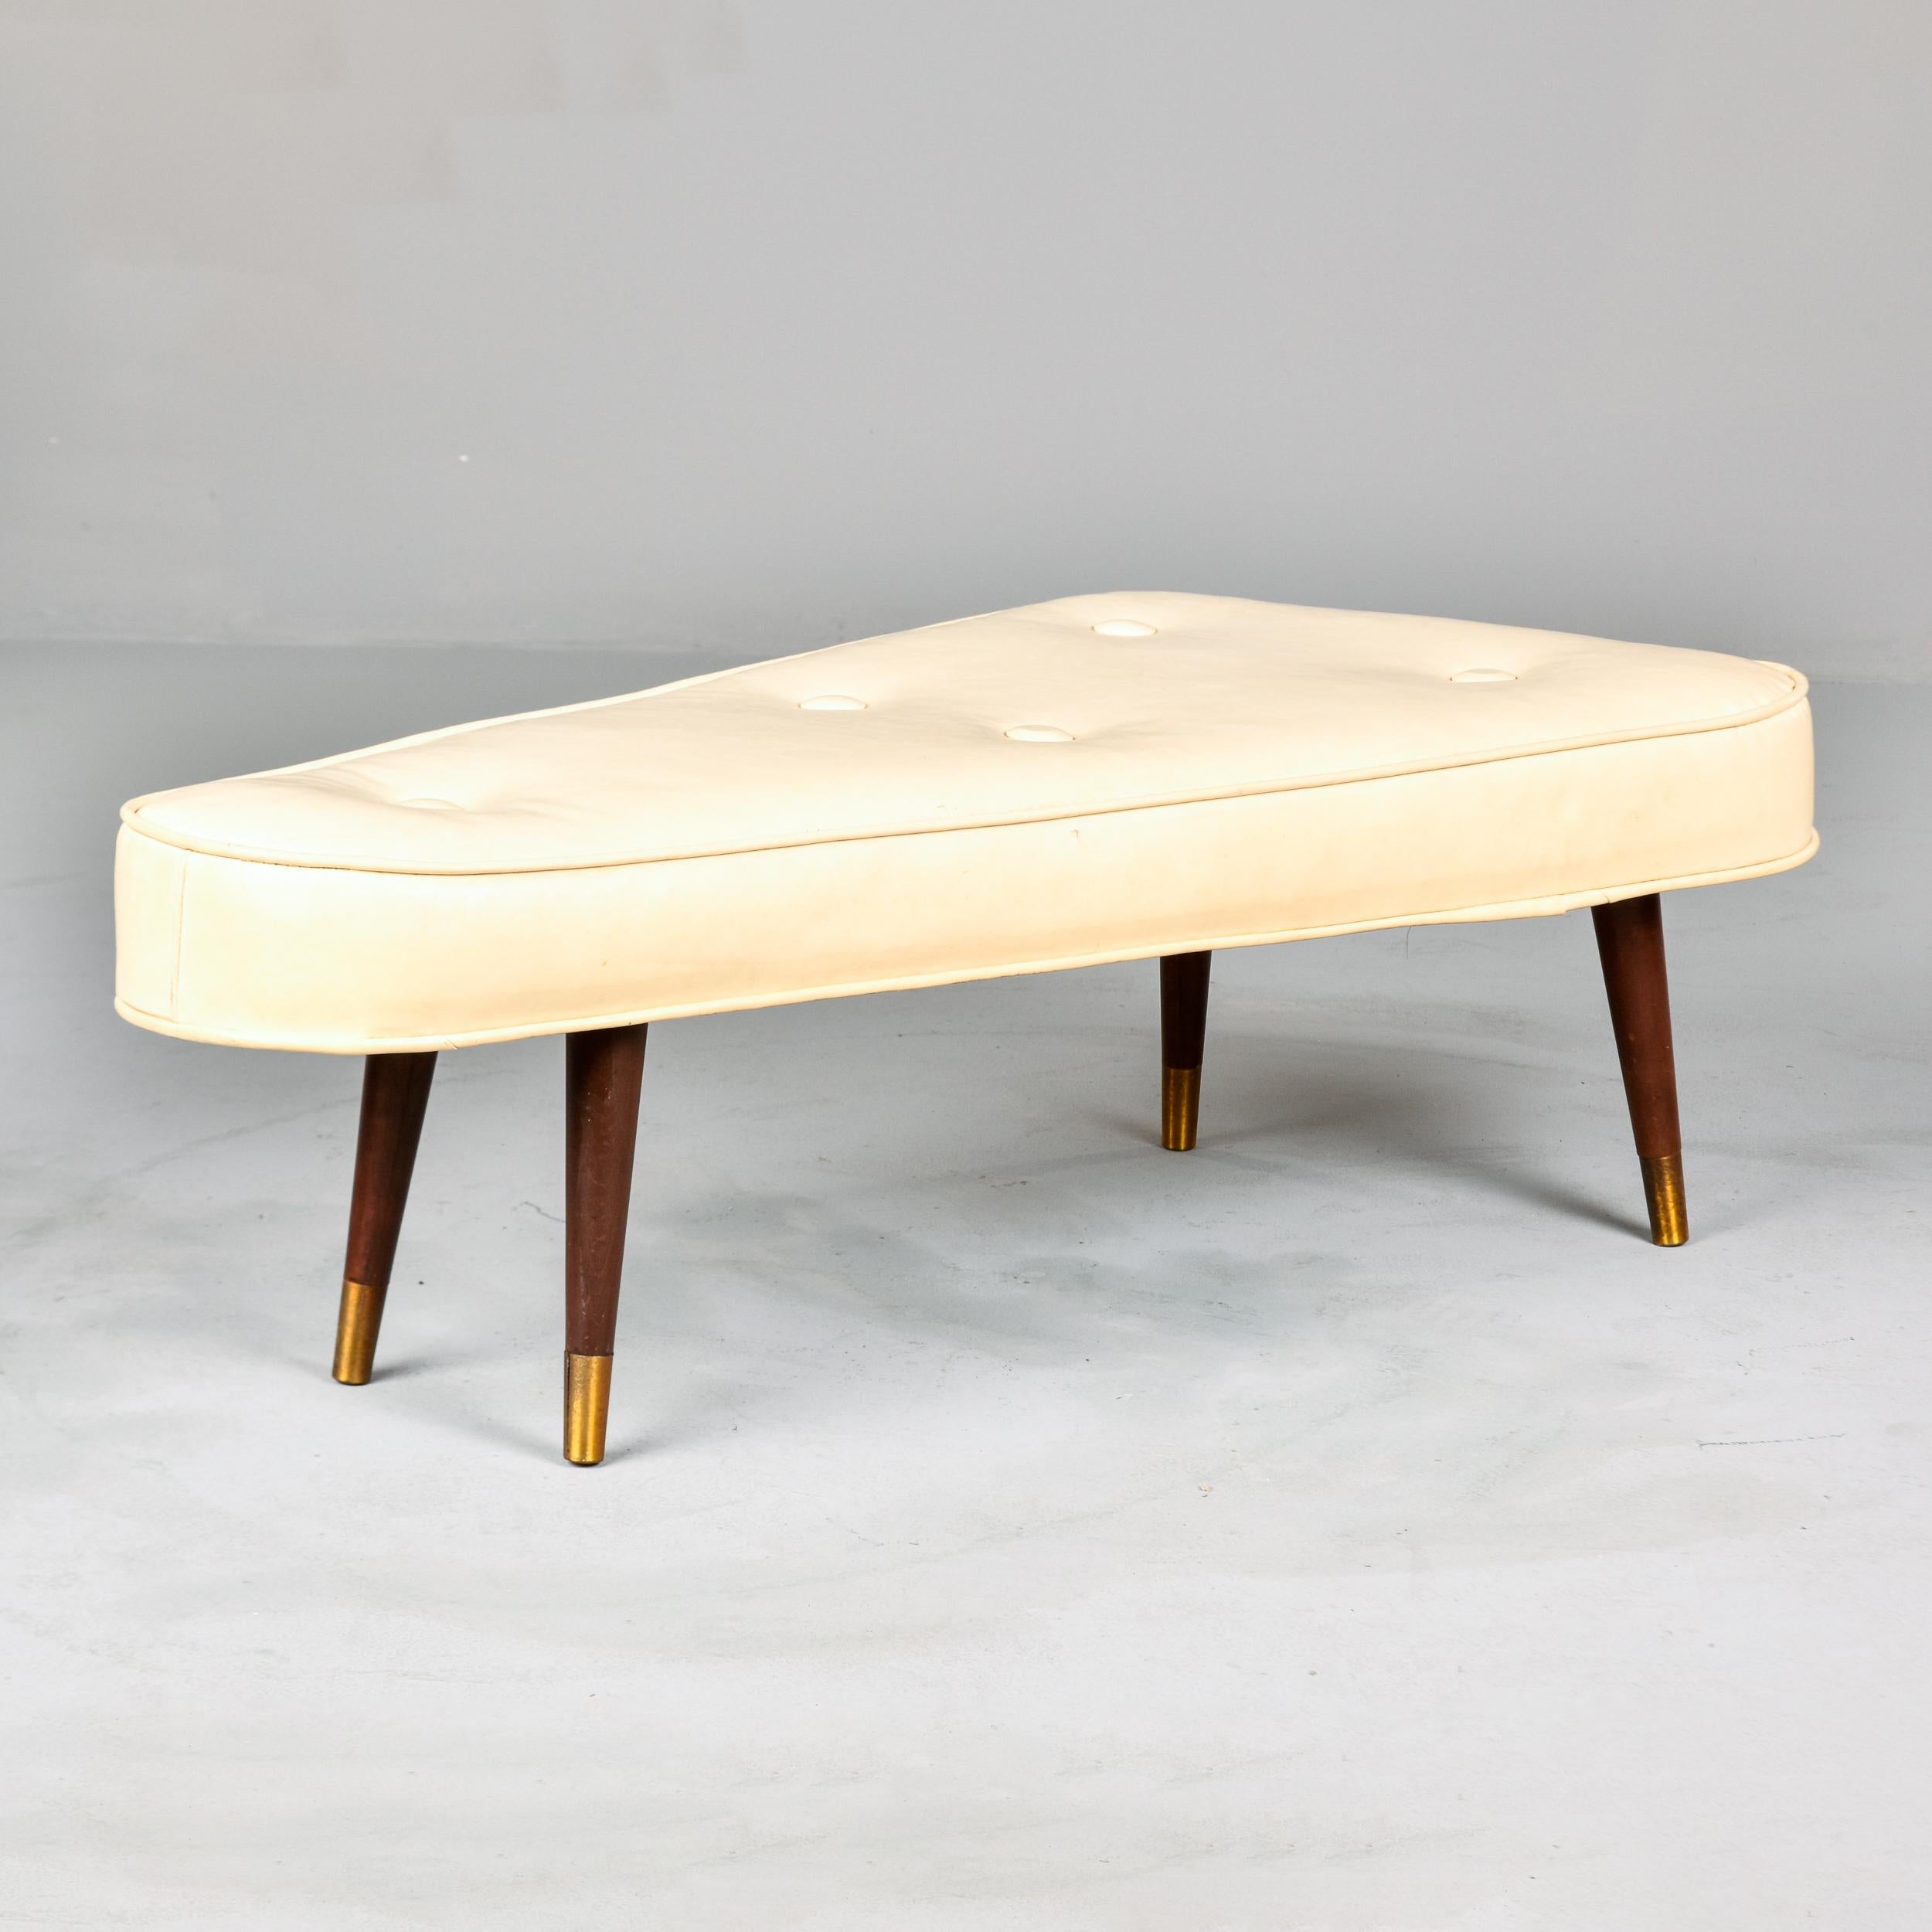 Found in the US, this triangular bench or stool dates from the late 1950s or early 1960s. Elongated triangular bench seat is upholstered in cream-colored vinyl with button tufting, single welt trim and four brass-tipped tapered wood legs. Unknown